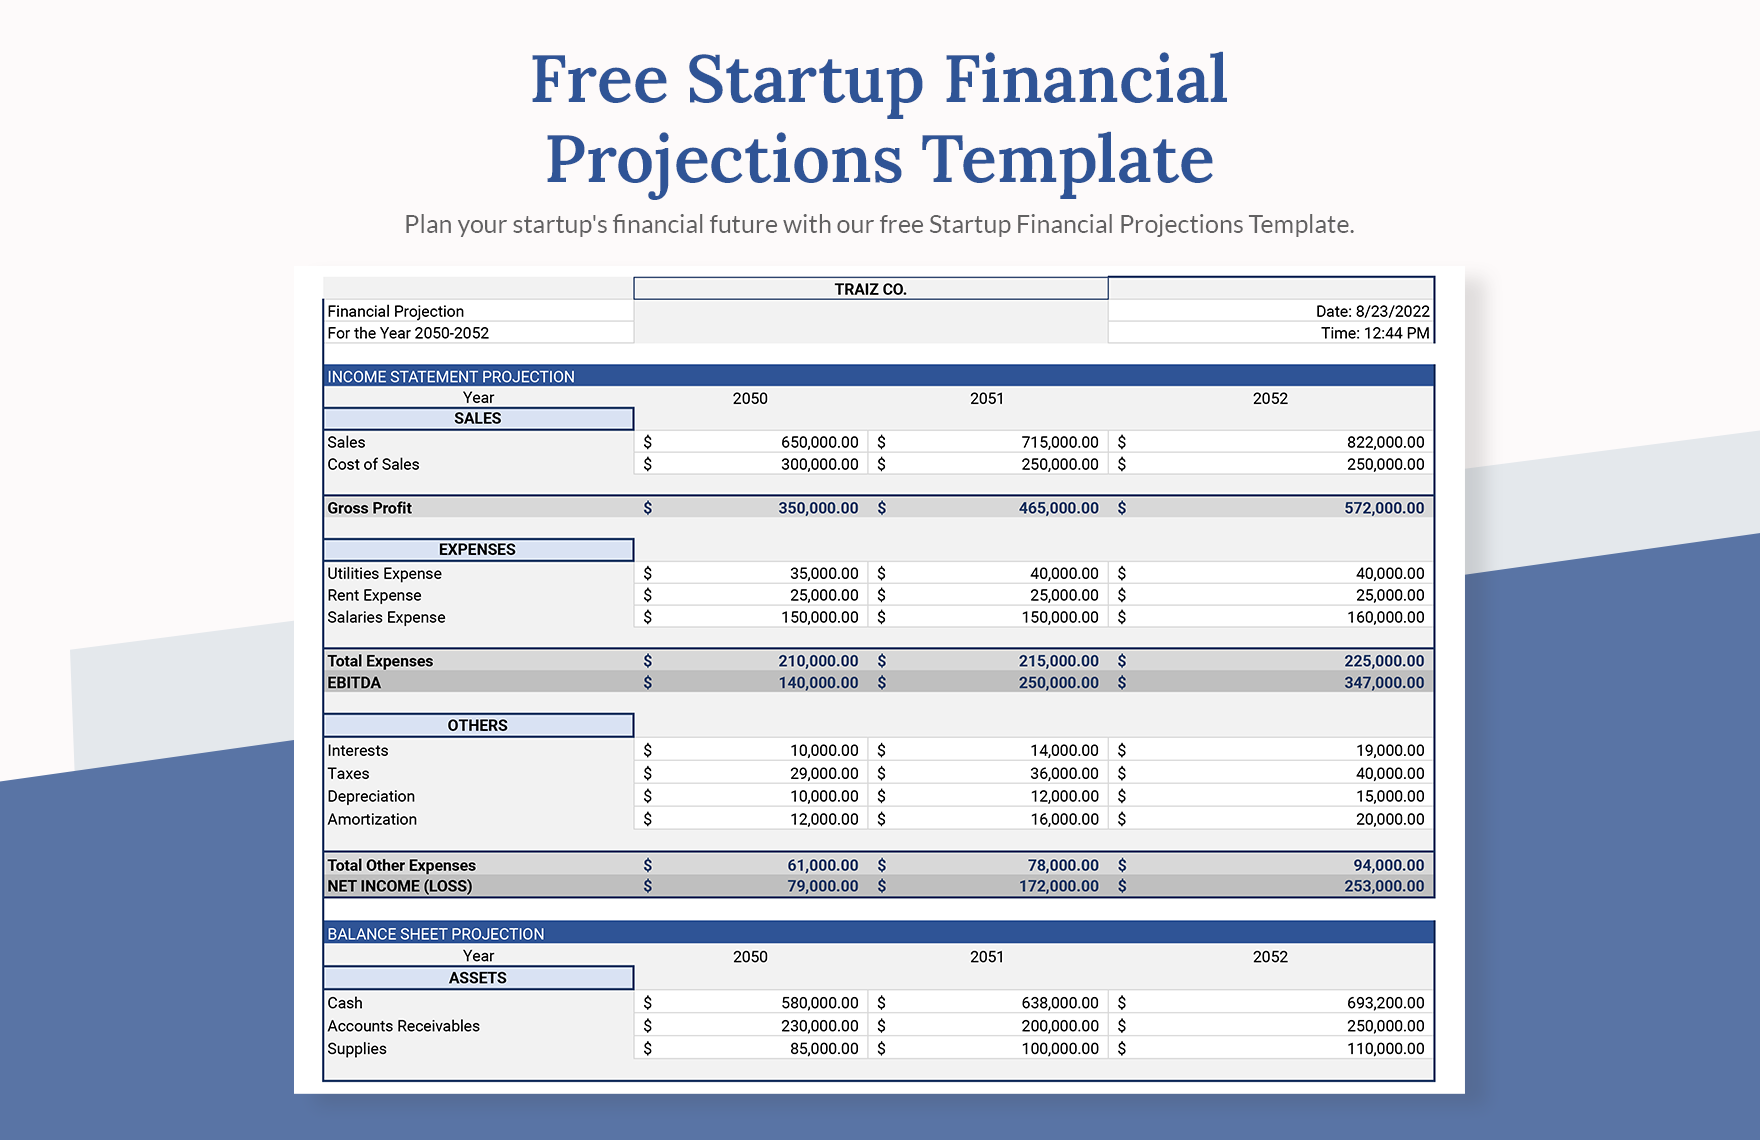 Free Startup Financial Projections Template